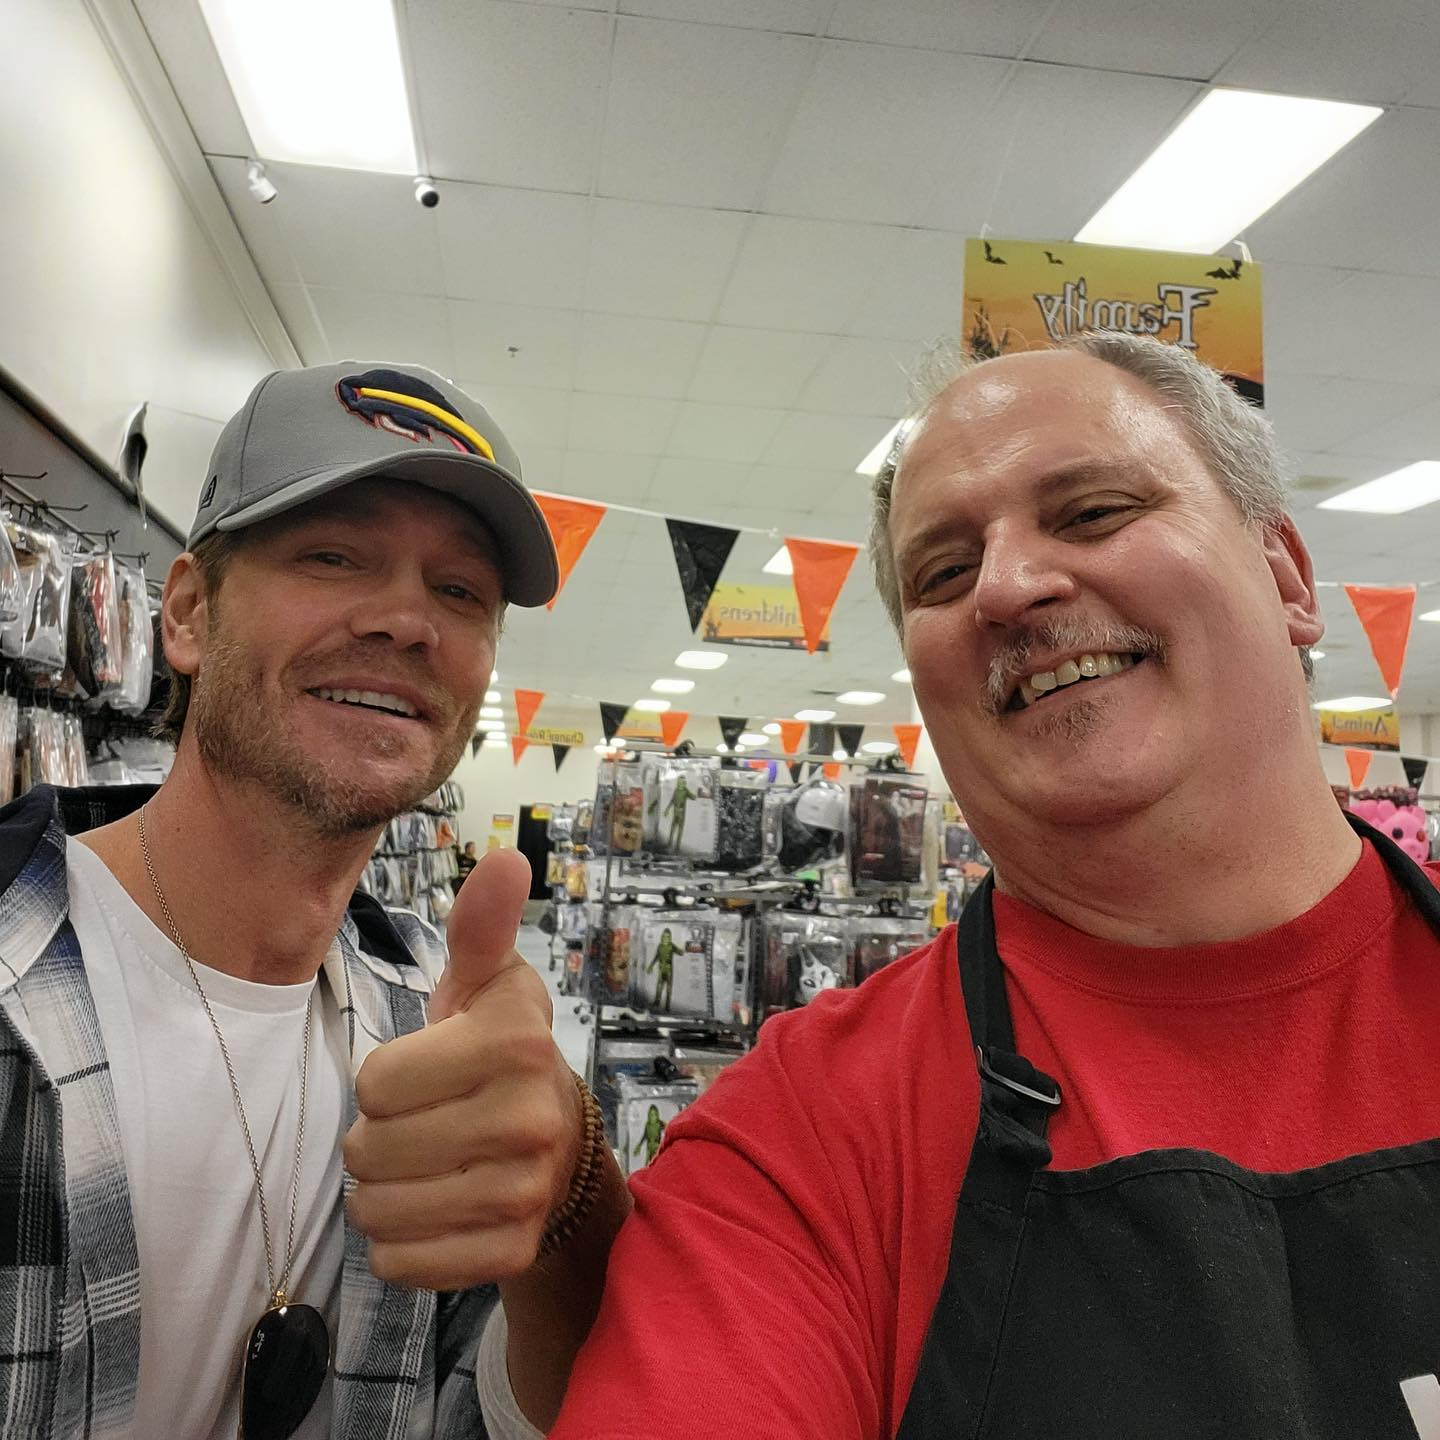 Chad Michael Murray Supports Local In Halifax!